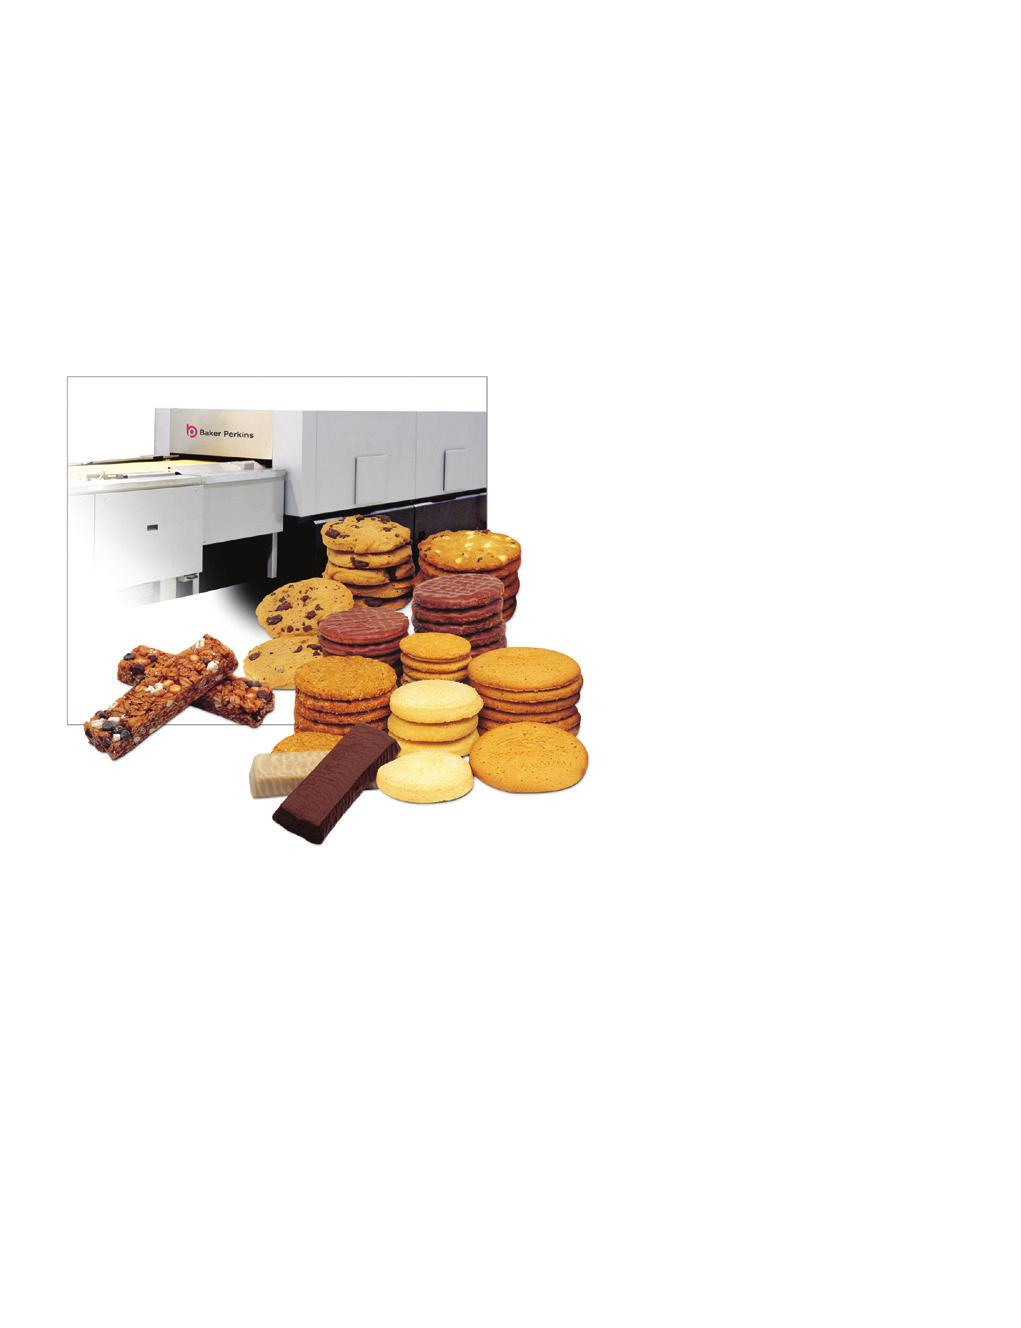 Jetcirc Convection Oven cookies and bars The Jetcirc oven offers high throughput and low operating costs across the full range of hard and soft cookies and bars.